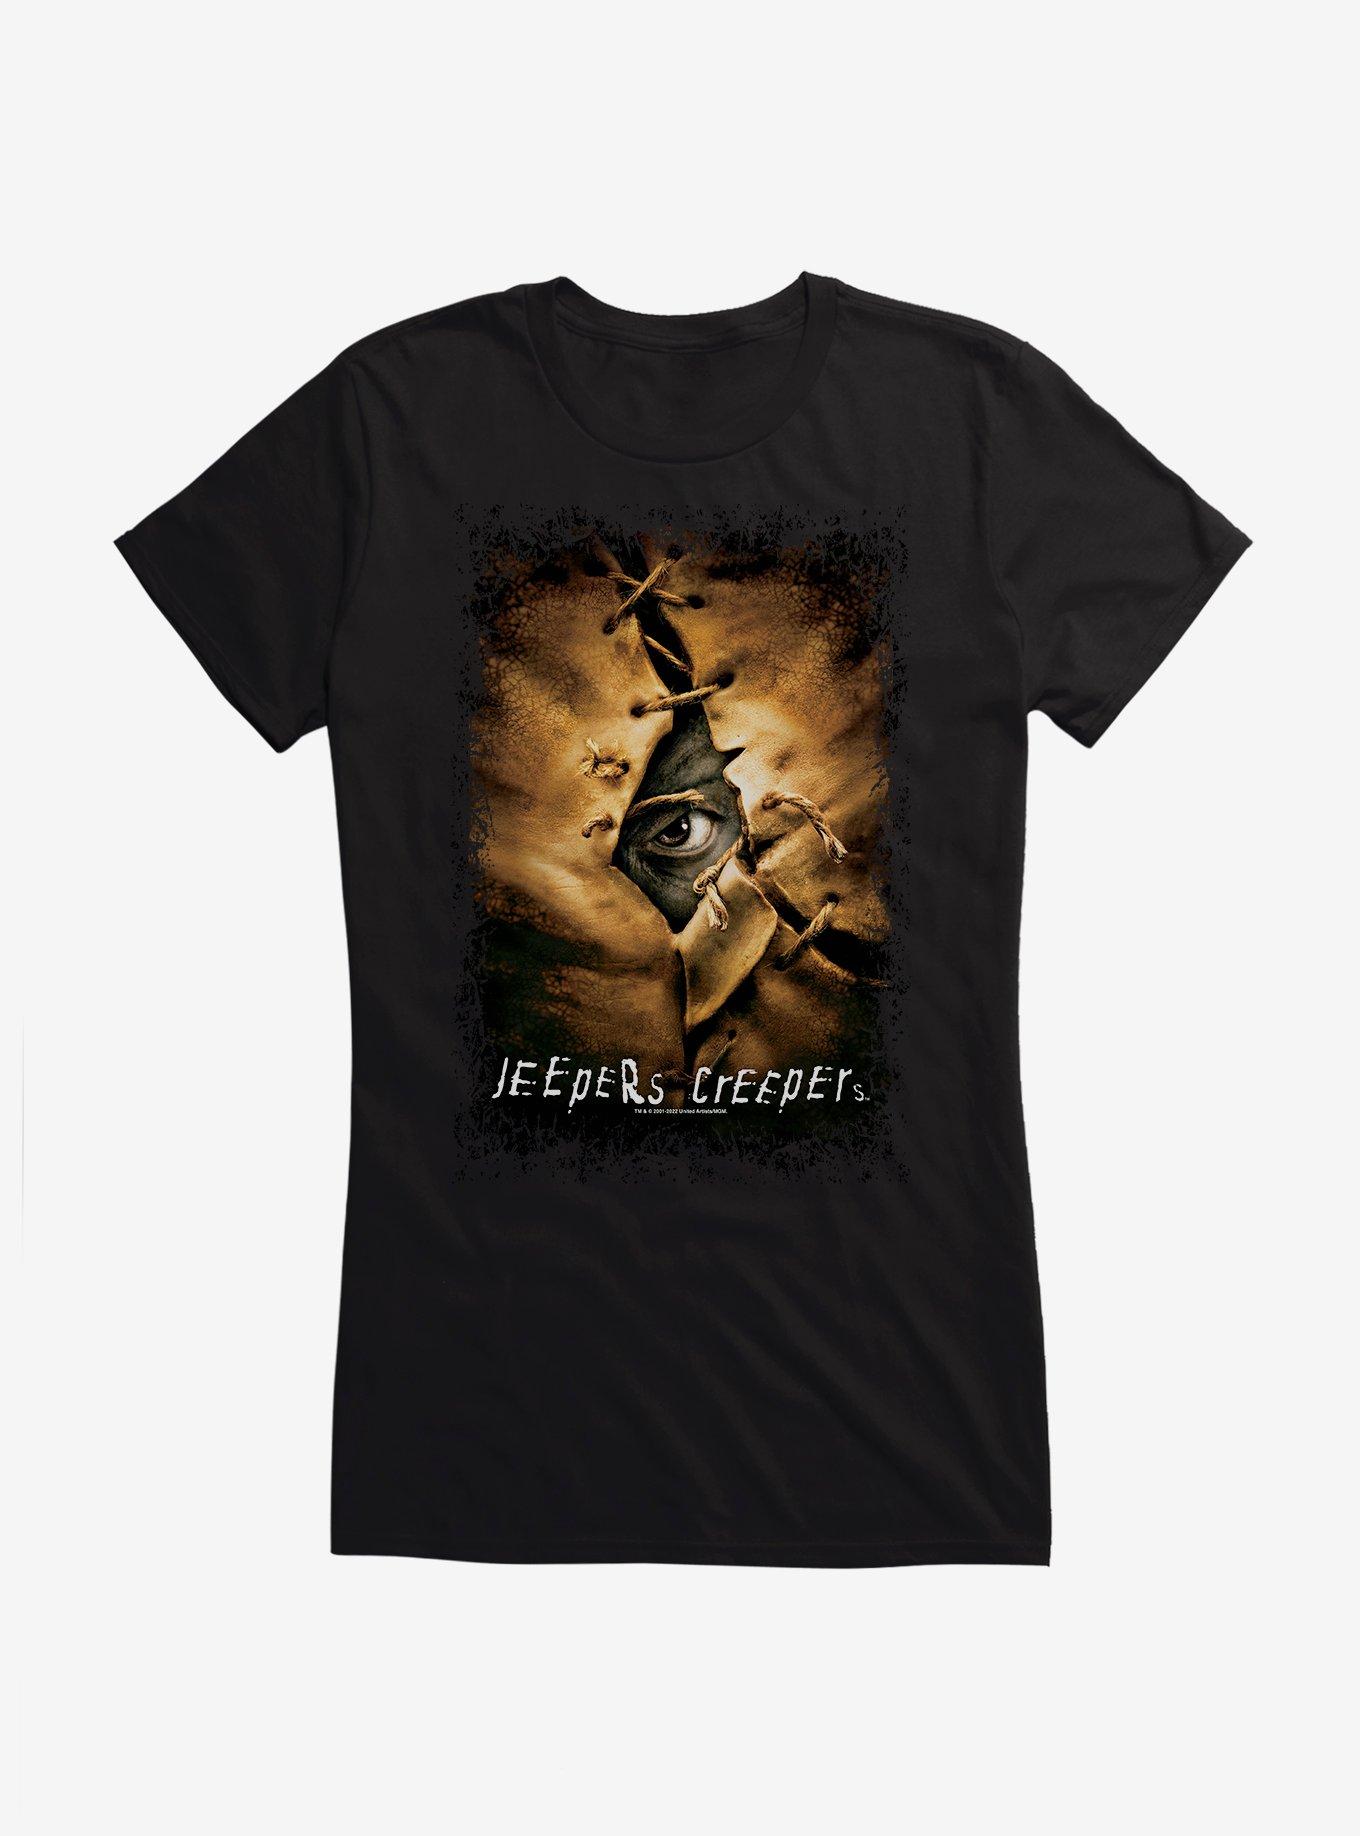 Jeepers Creepers Poster Girls T-Shirt, BLACK, hi-res